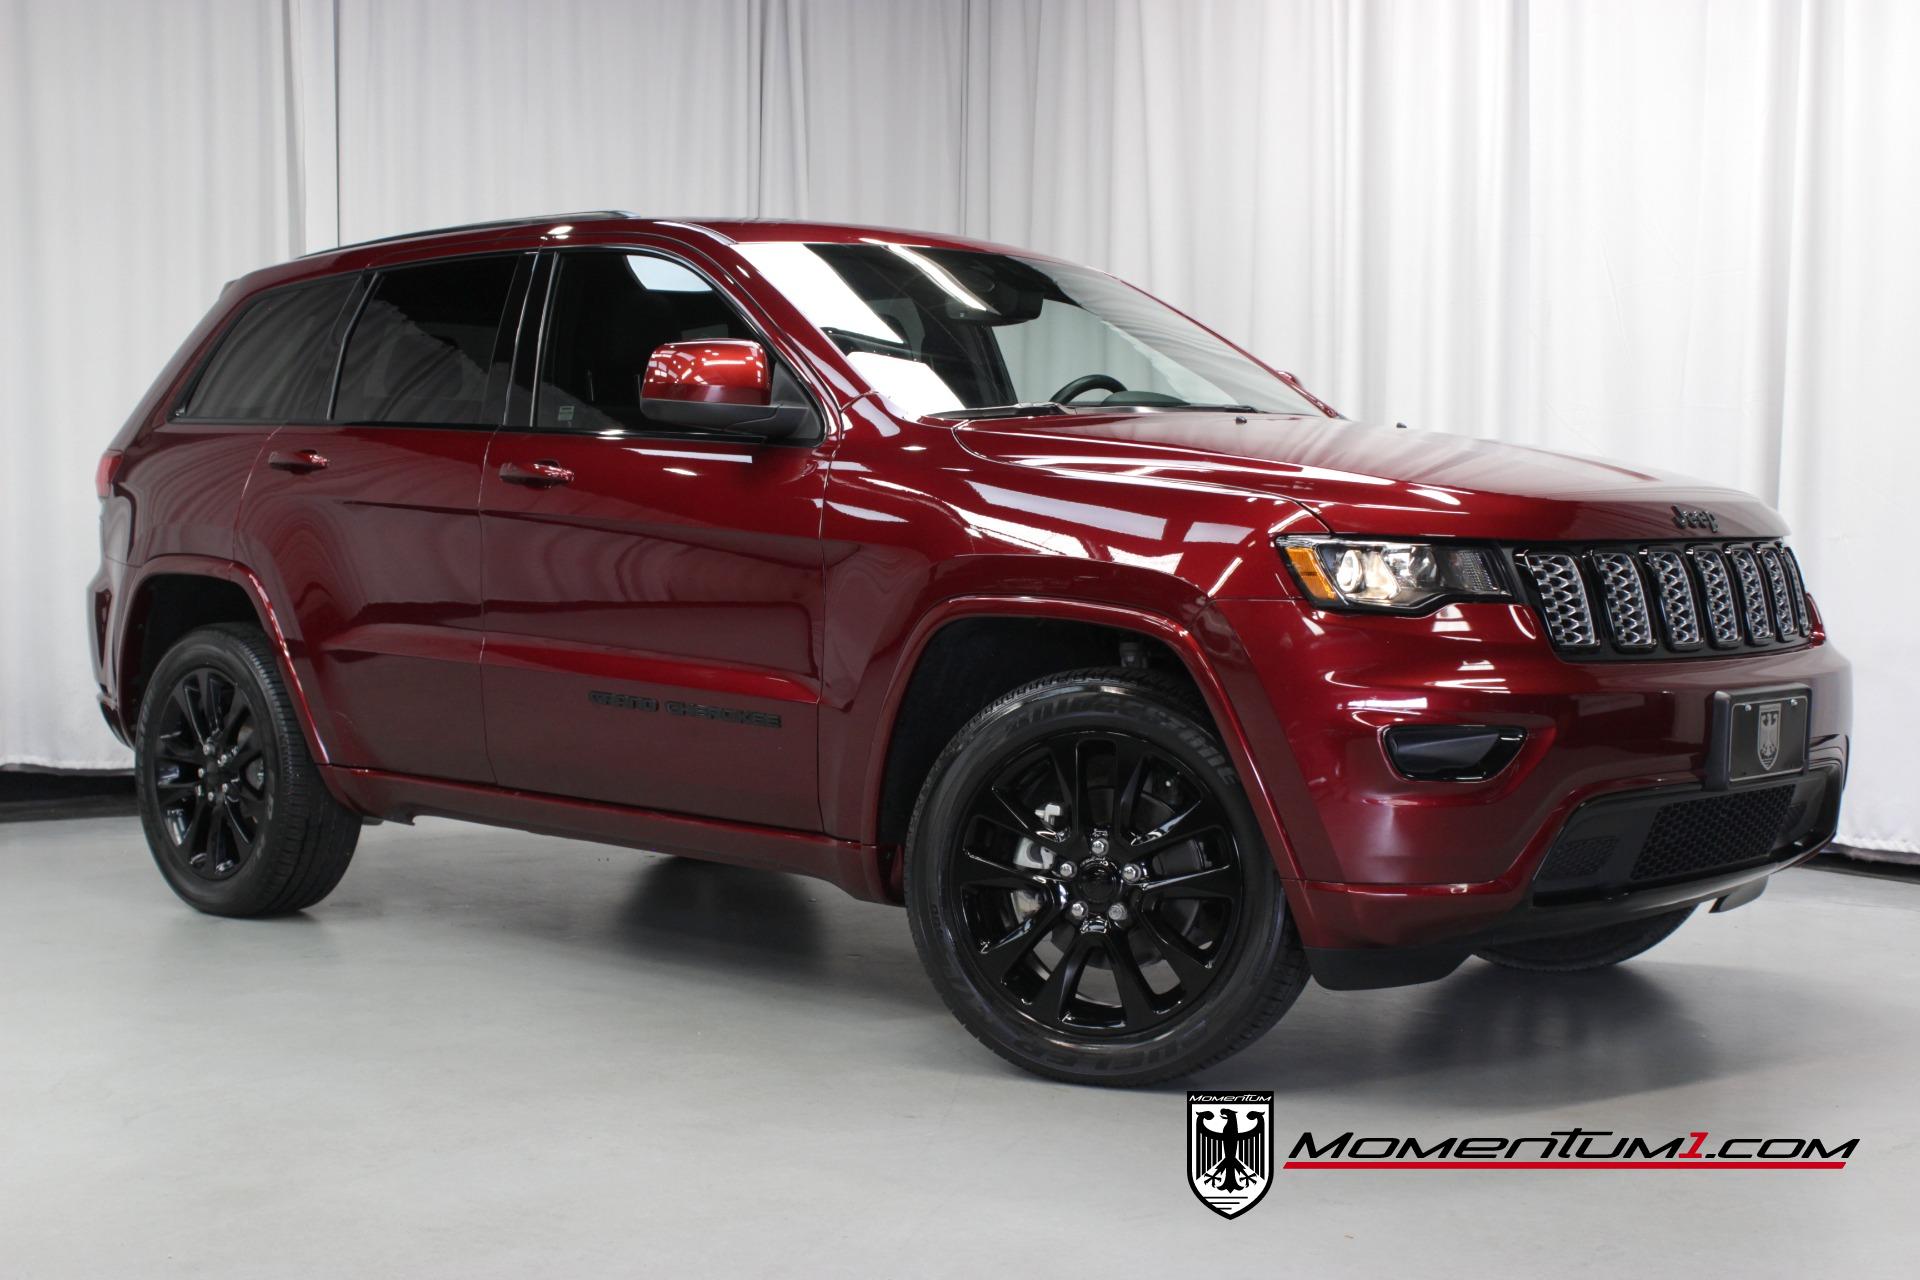 Used 2019 Jeep Grand Cherokee Altitude For Sale (Sold) Momentum